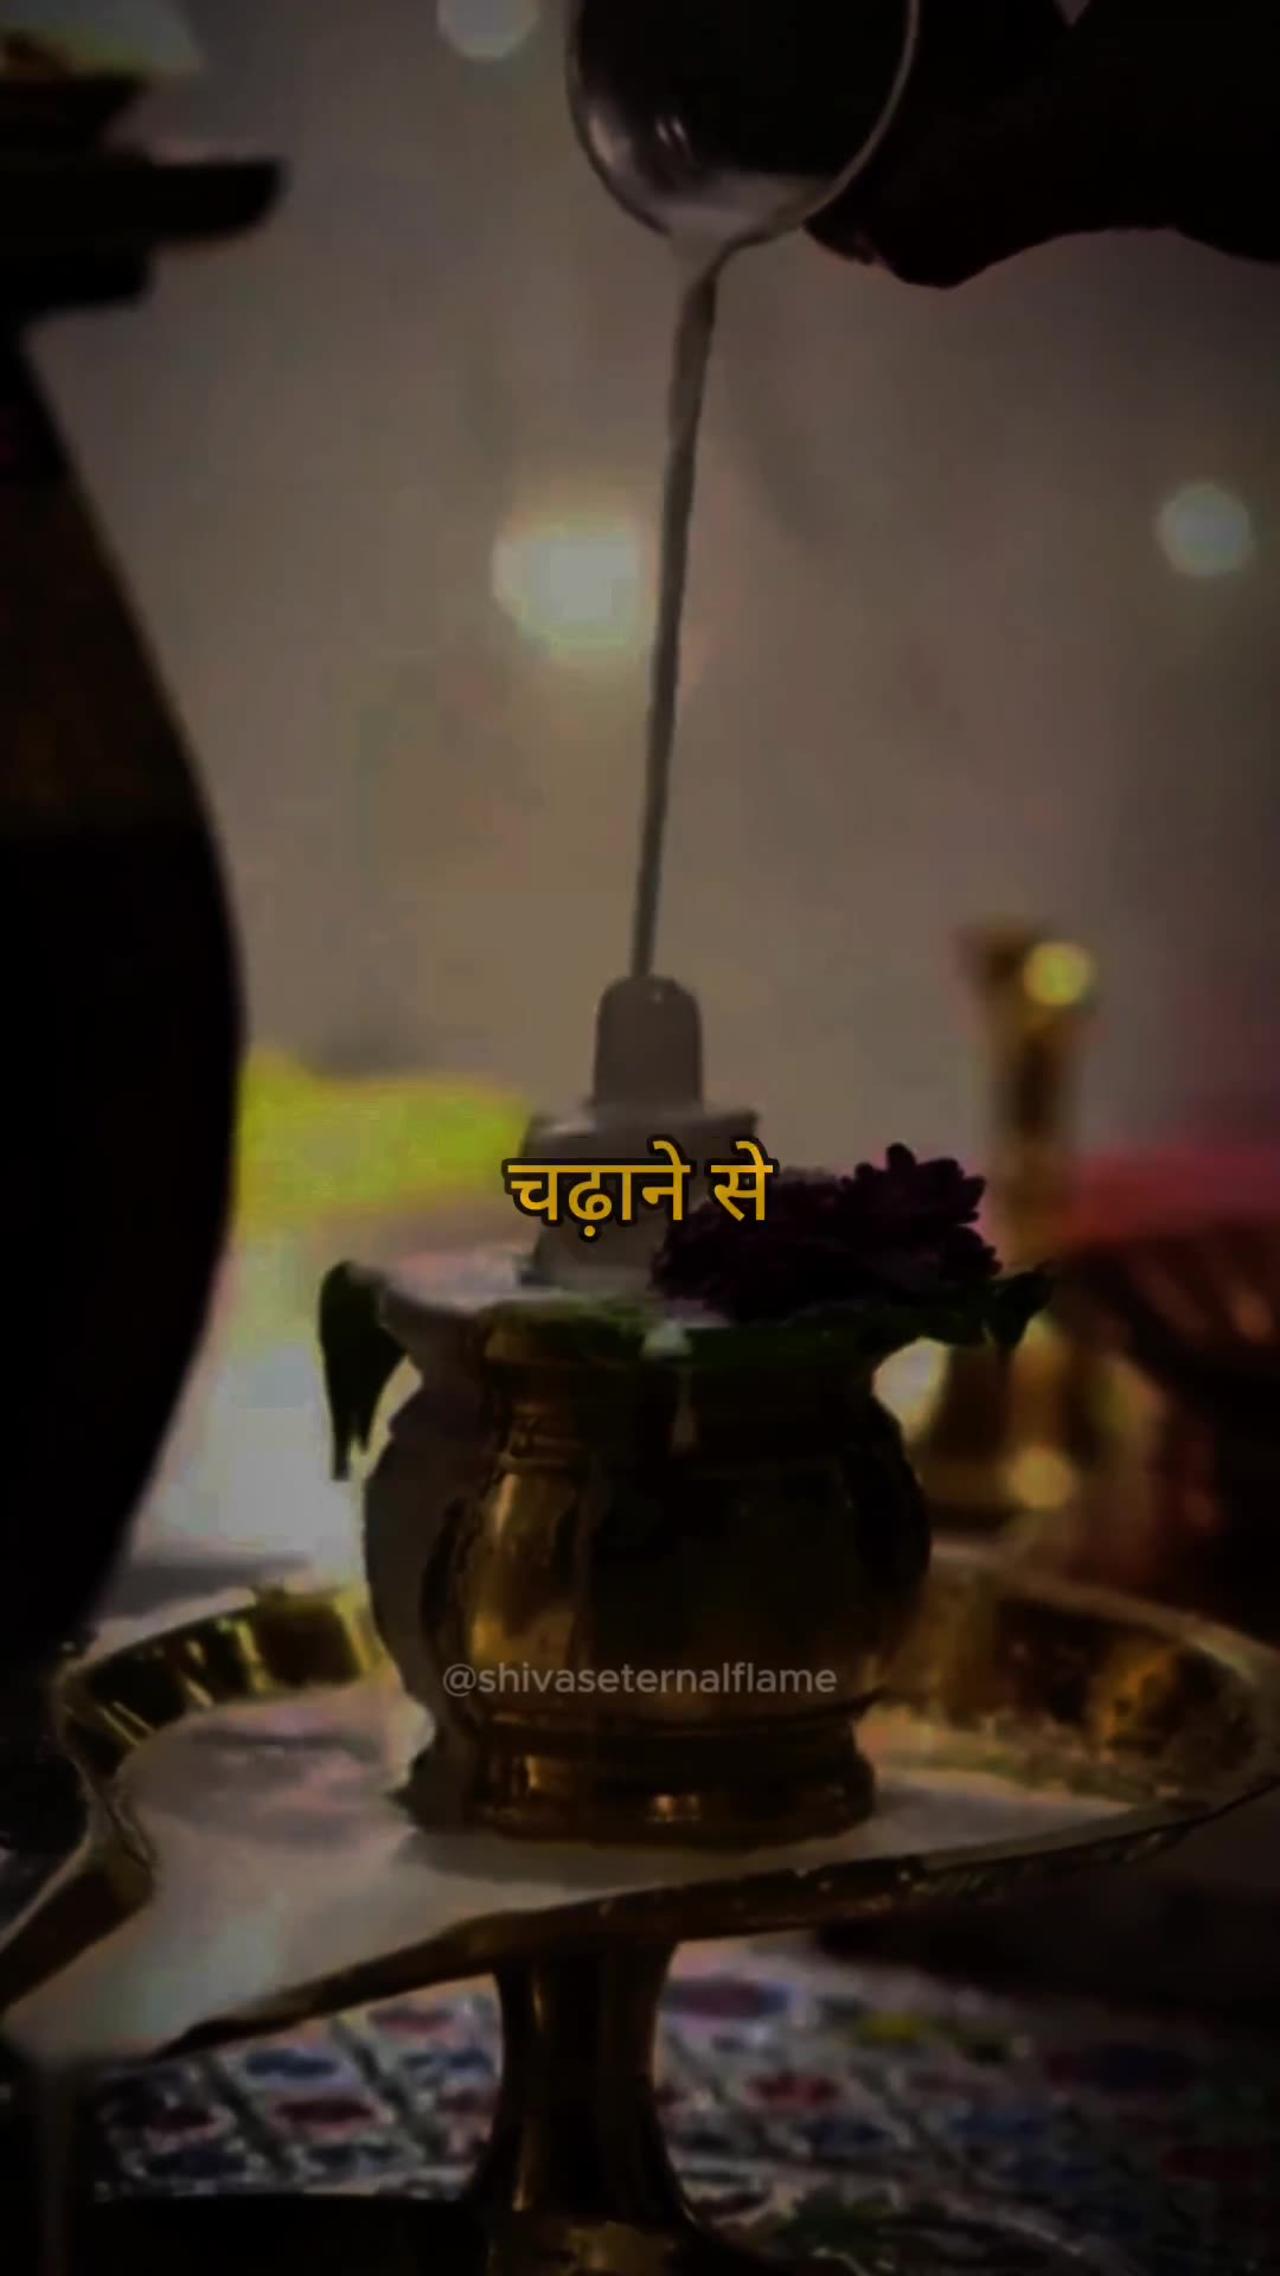 Hindu shivling rules and there affects